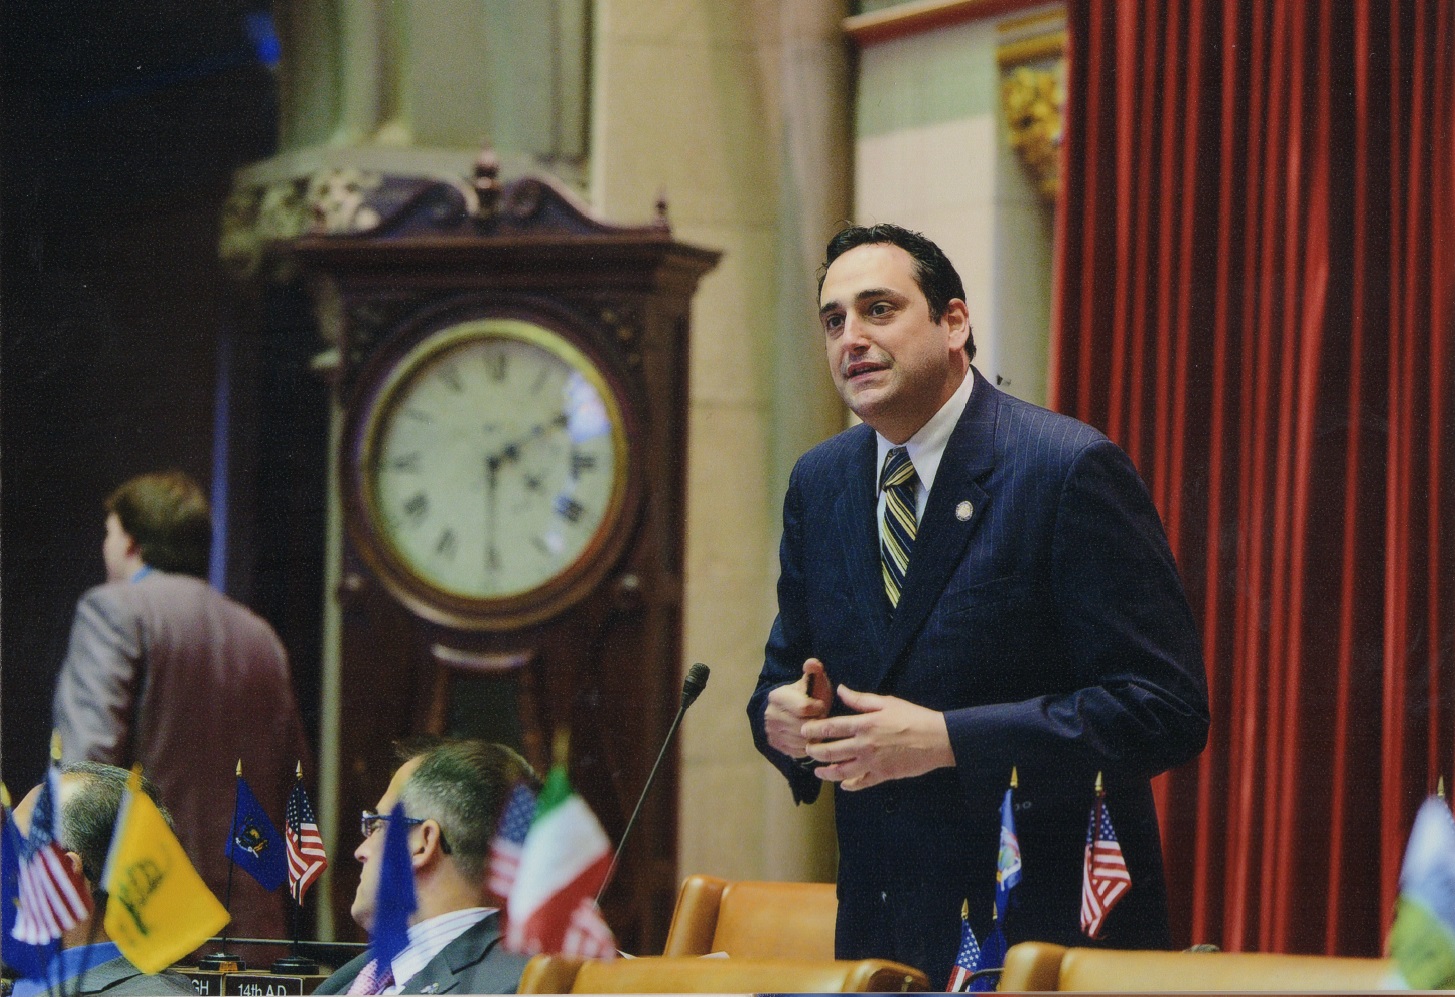   &nbsp;Chad Lupinacci speaks on the Assembly floor.  